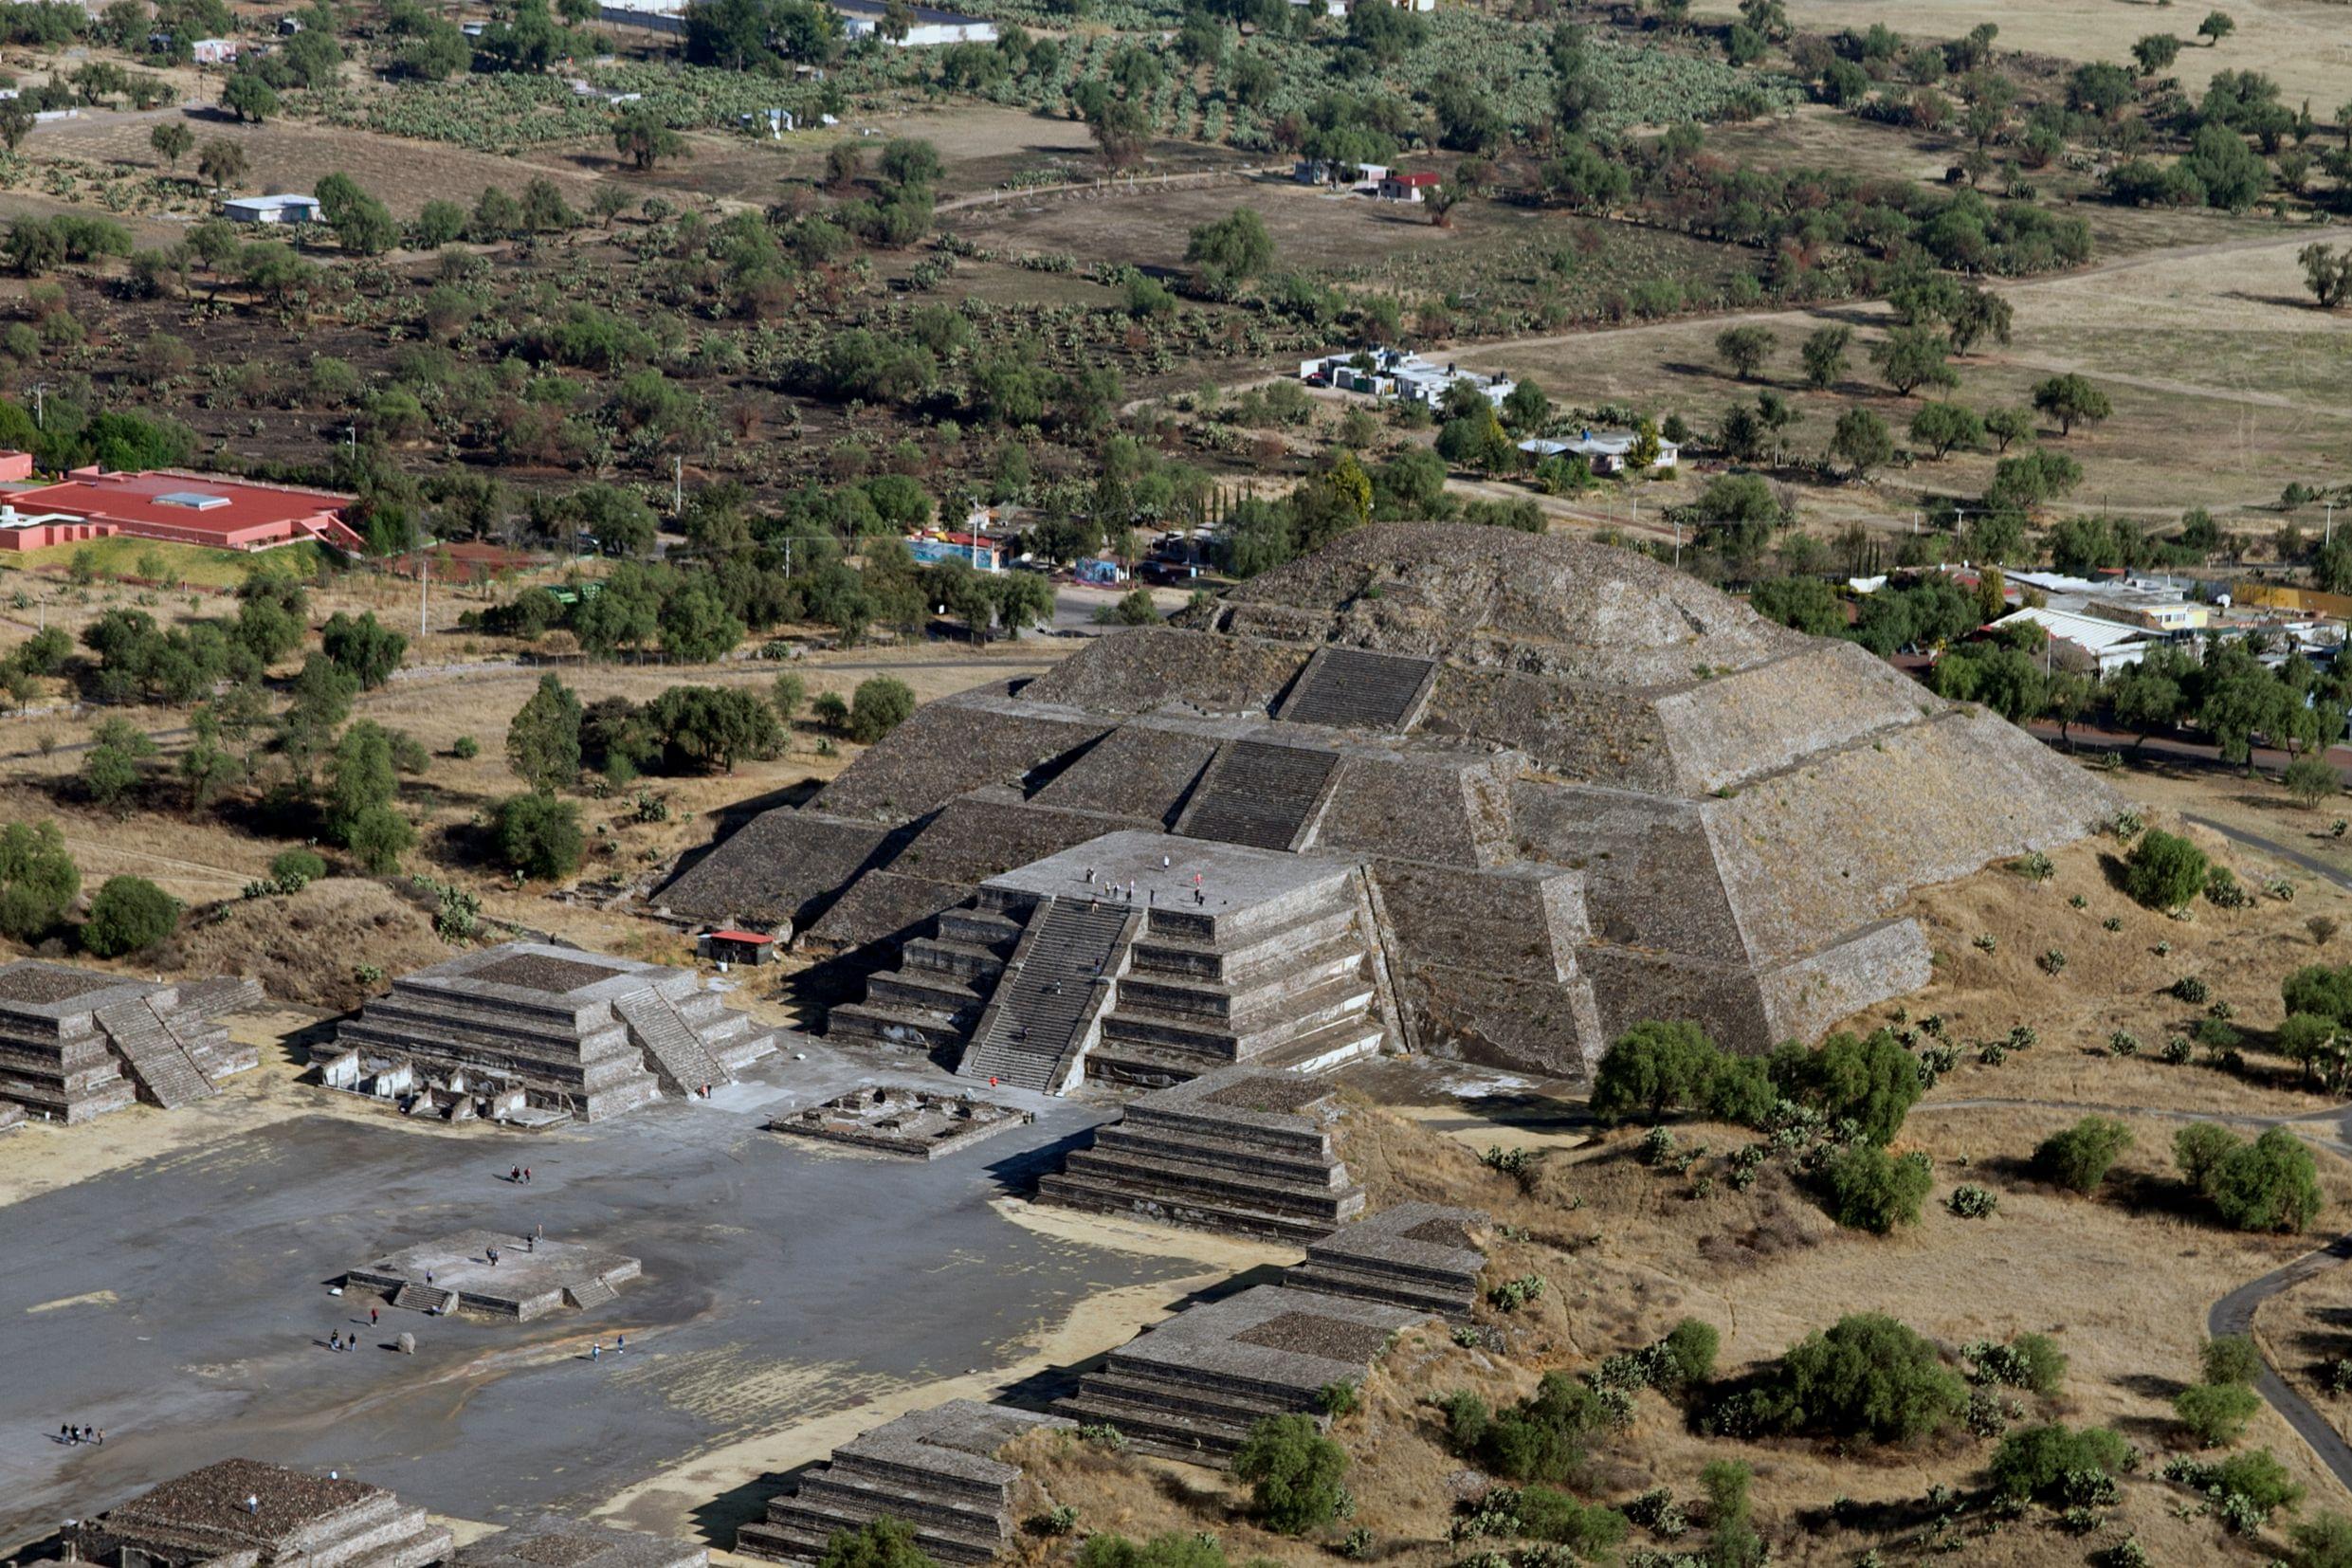 Teotihuacan Tours from Mexico City